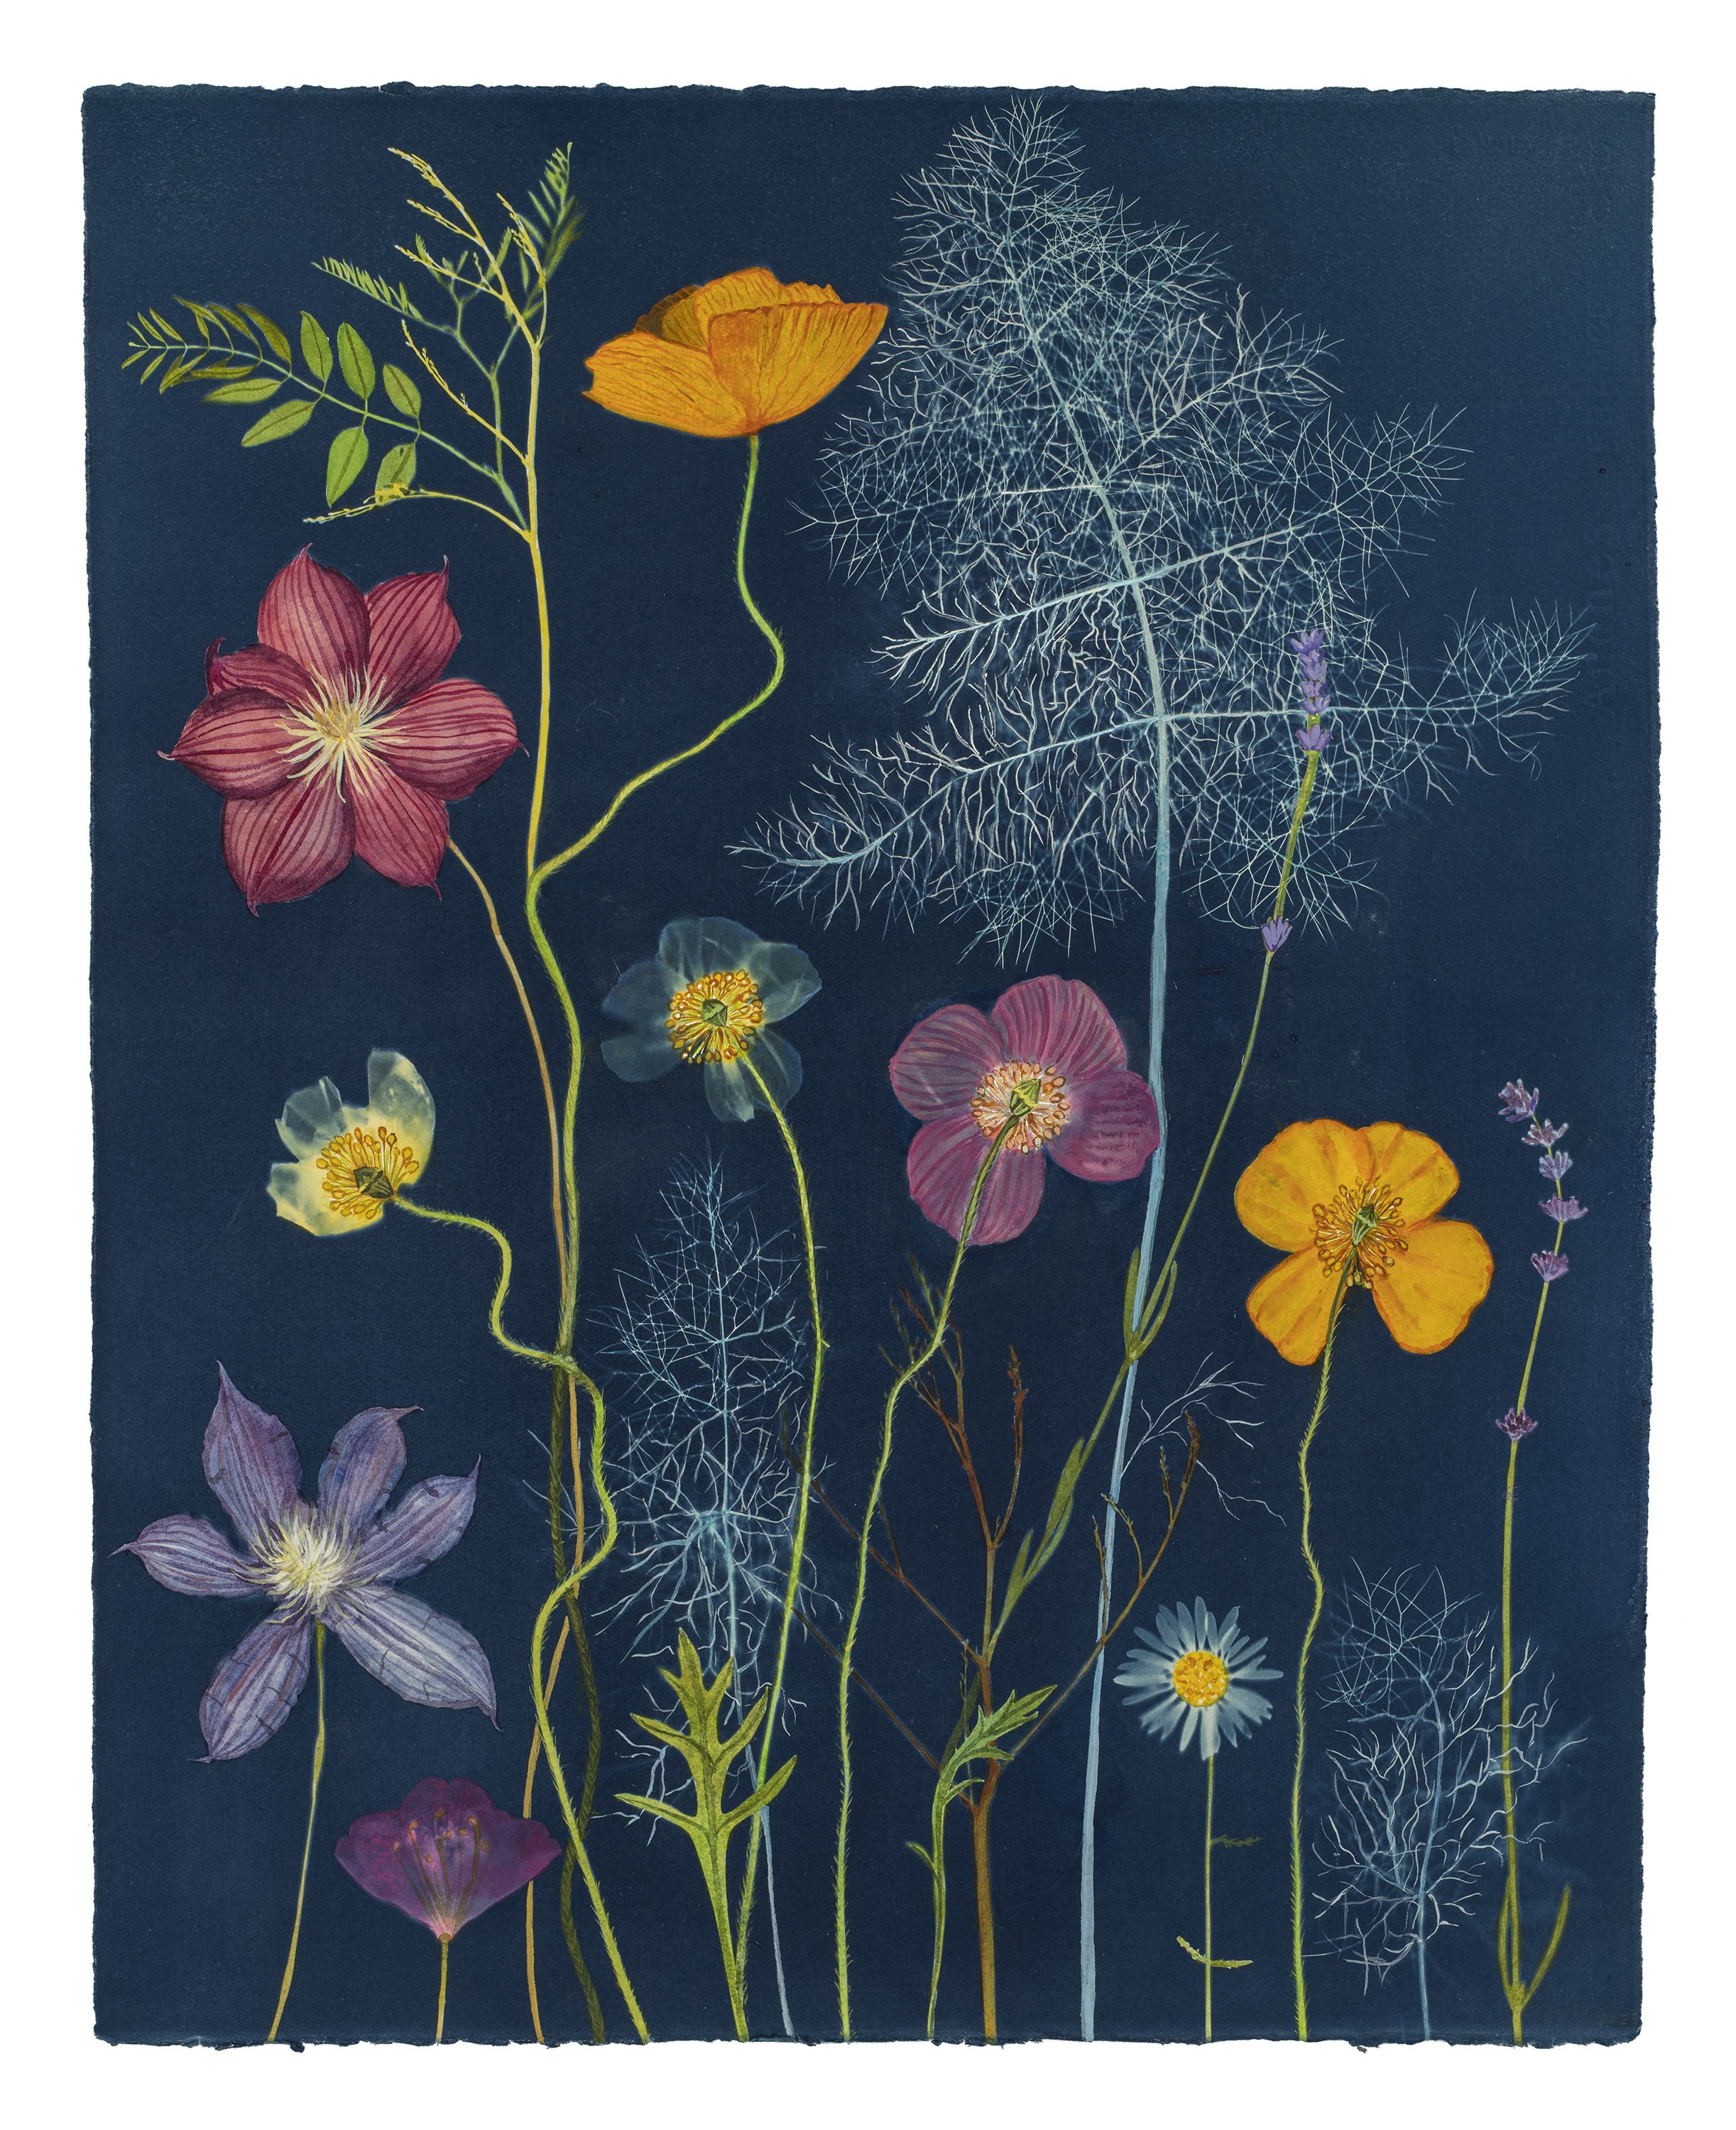 Cyanotype Painting (Clematis, Poppies, Dill, etc)